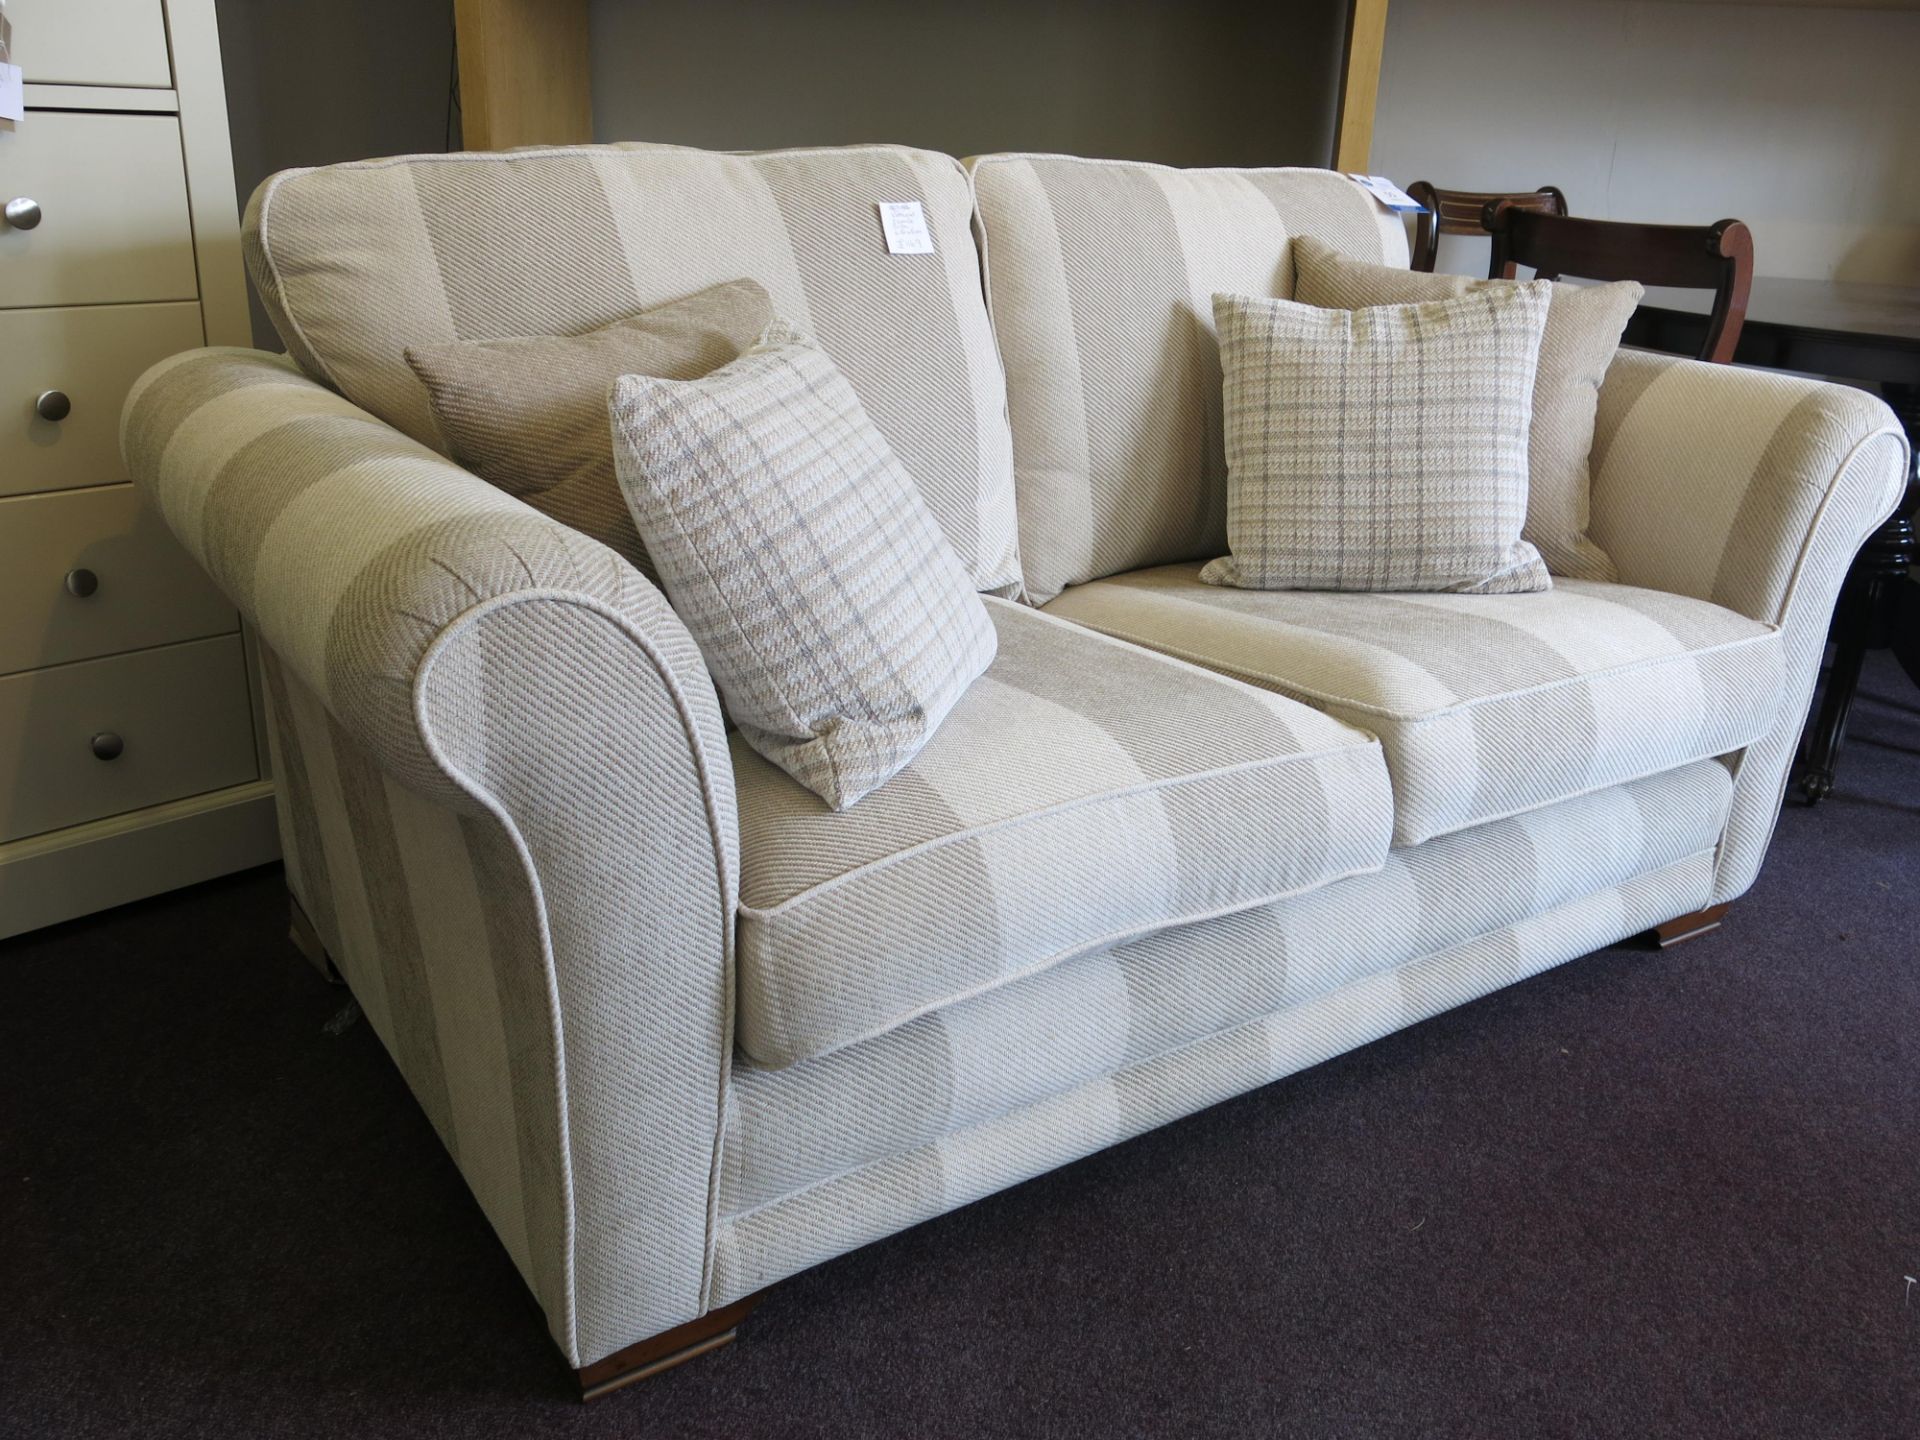 Alstons Vermont two seat sofa with four scatter cushions. The sofa is covered with natural tweed - Image 2 of 2